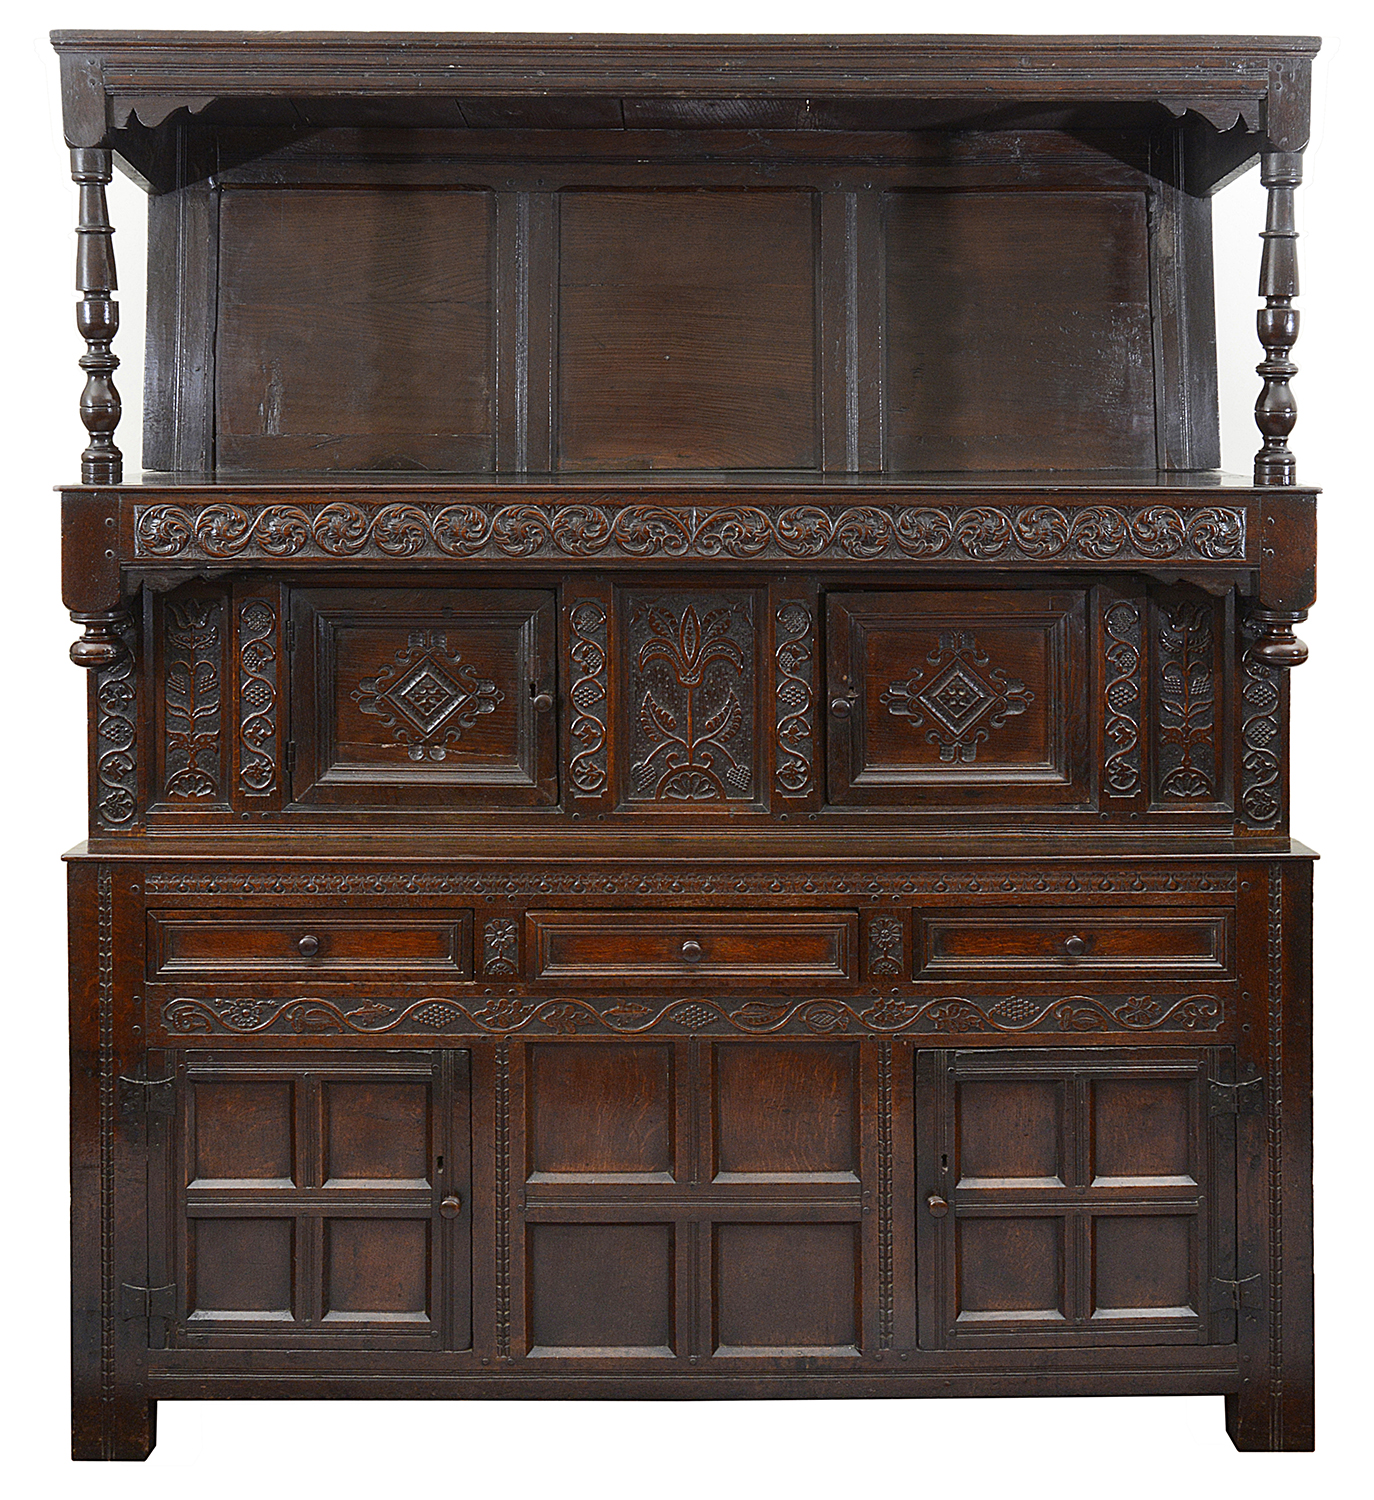 A late 17th century panelled oak press cupboard or tridarn